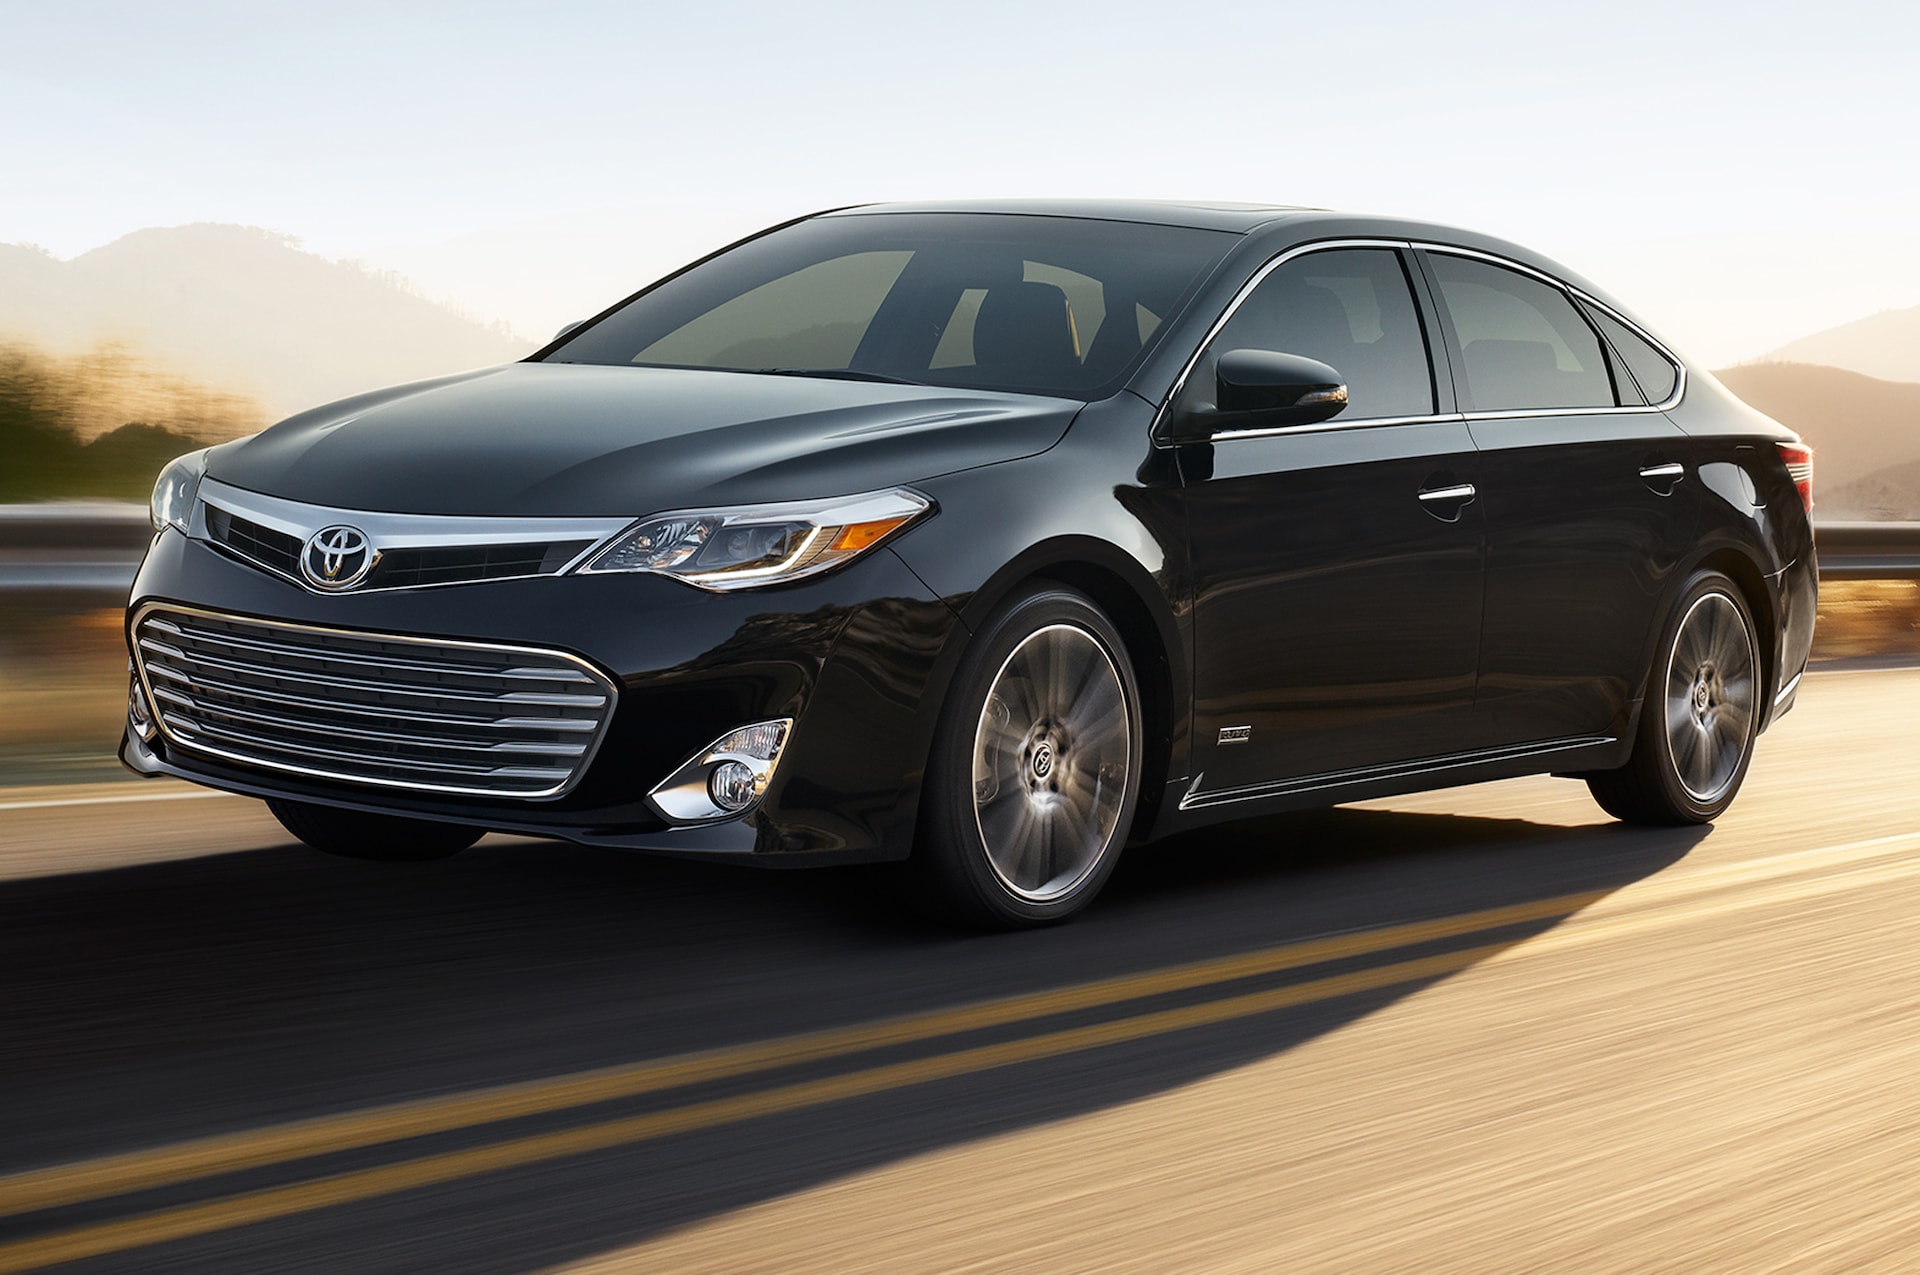 2015 Toyota Avalon Priced at $32,980, Gains Limited Sport Edition